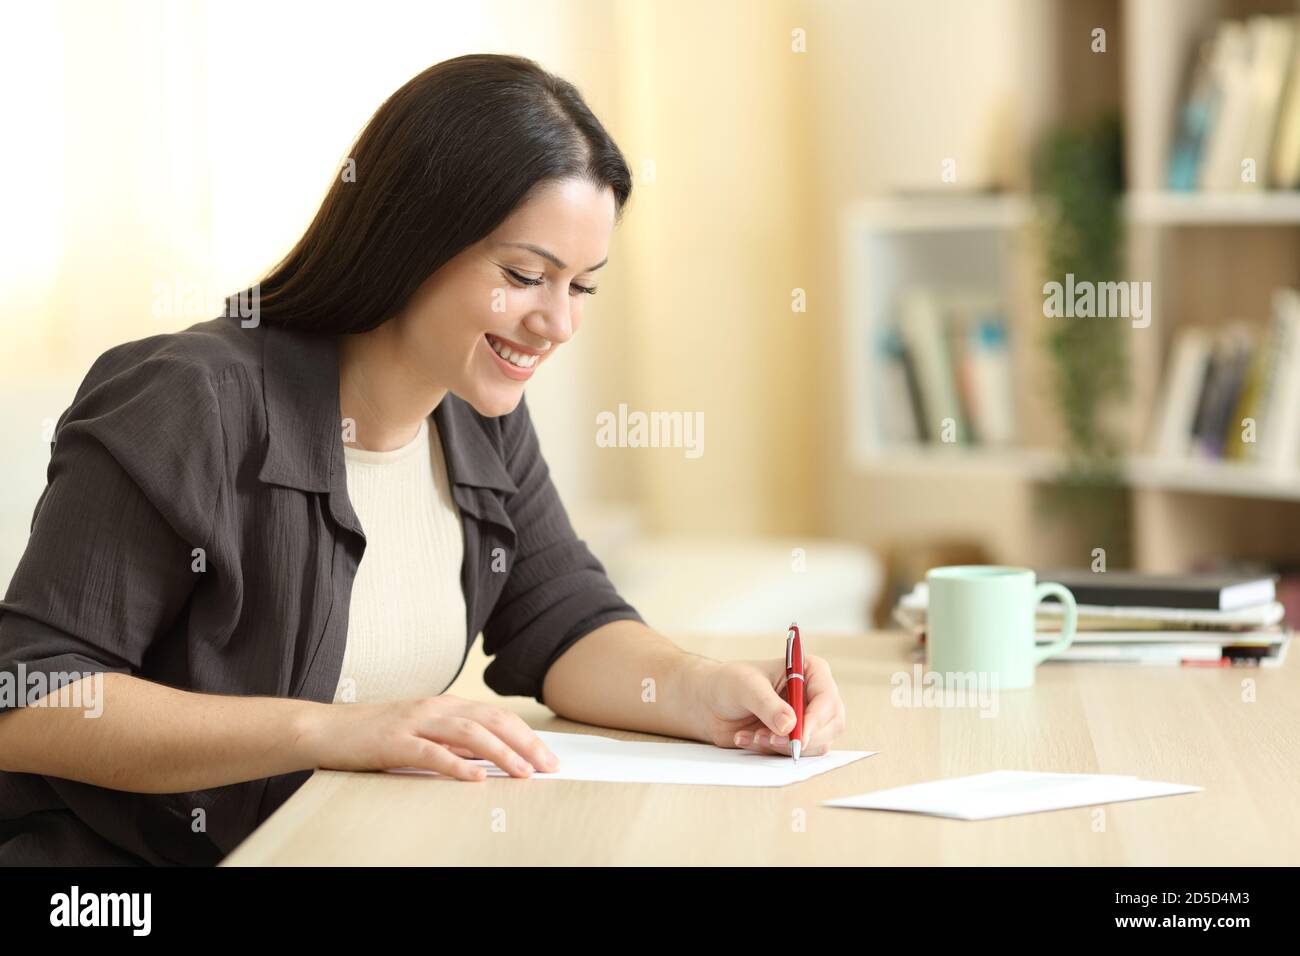 Happy woman writing letter on a table at home with a warm light Stock Photo